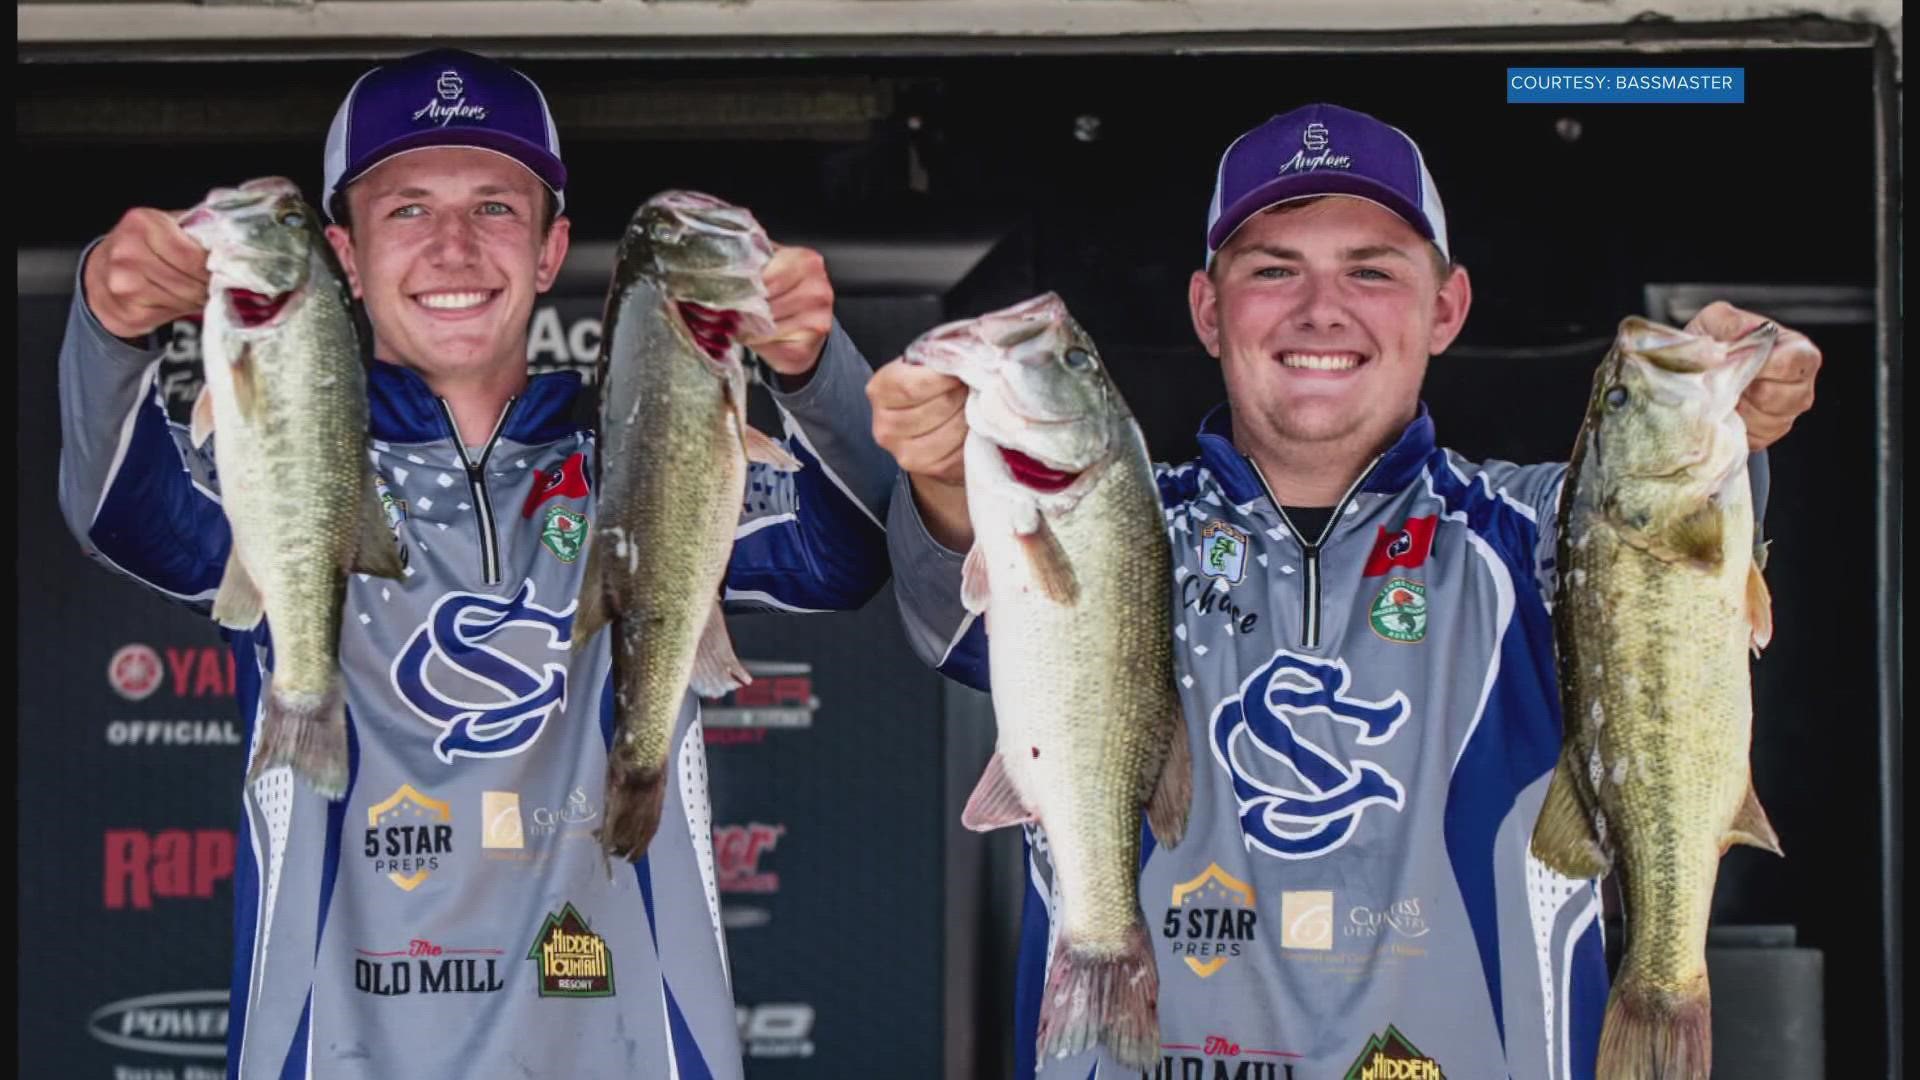 Bassmaster says the pair, Ty Trentham and Chase McCarter, placed fourth with 15 total fish caught for a total of 37 pounds.